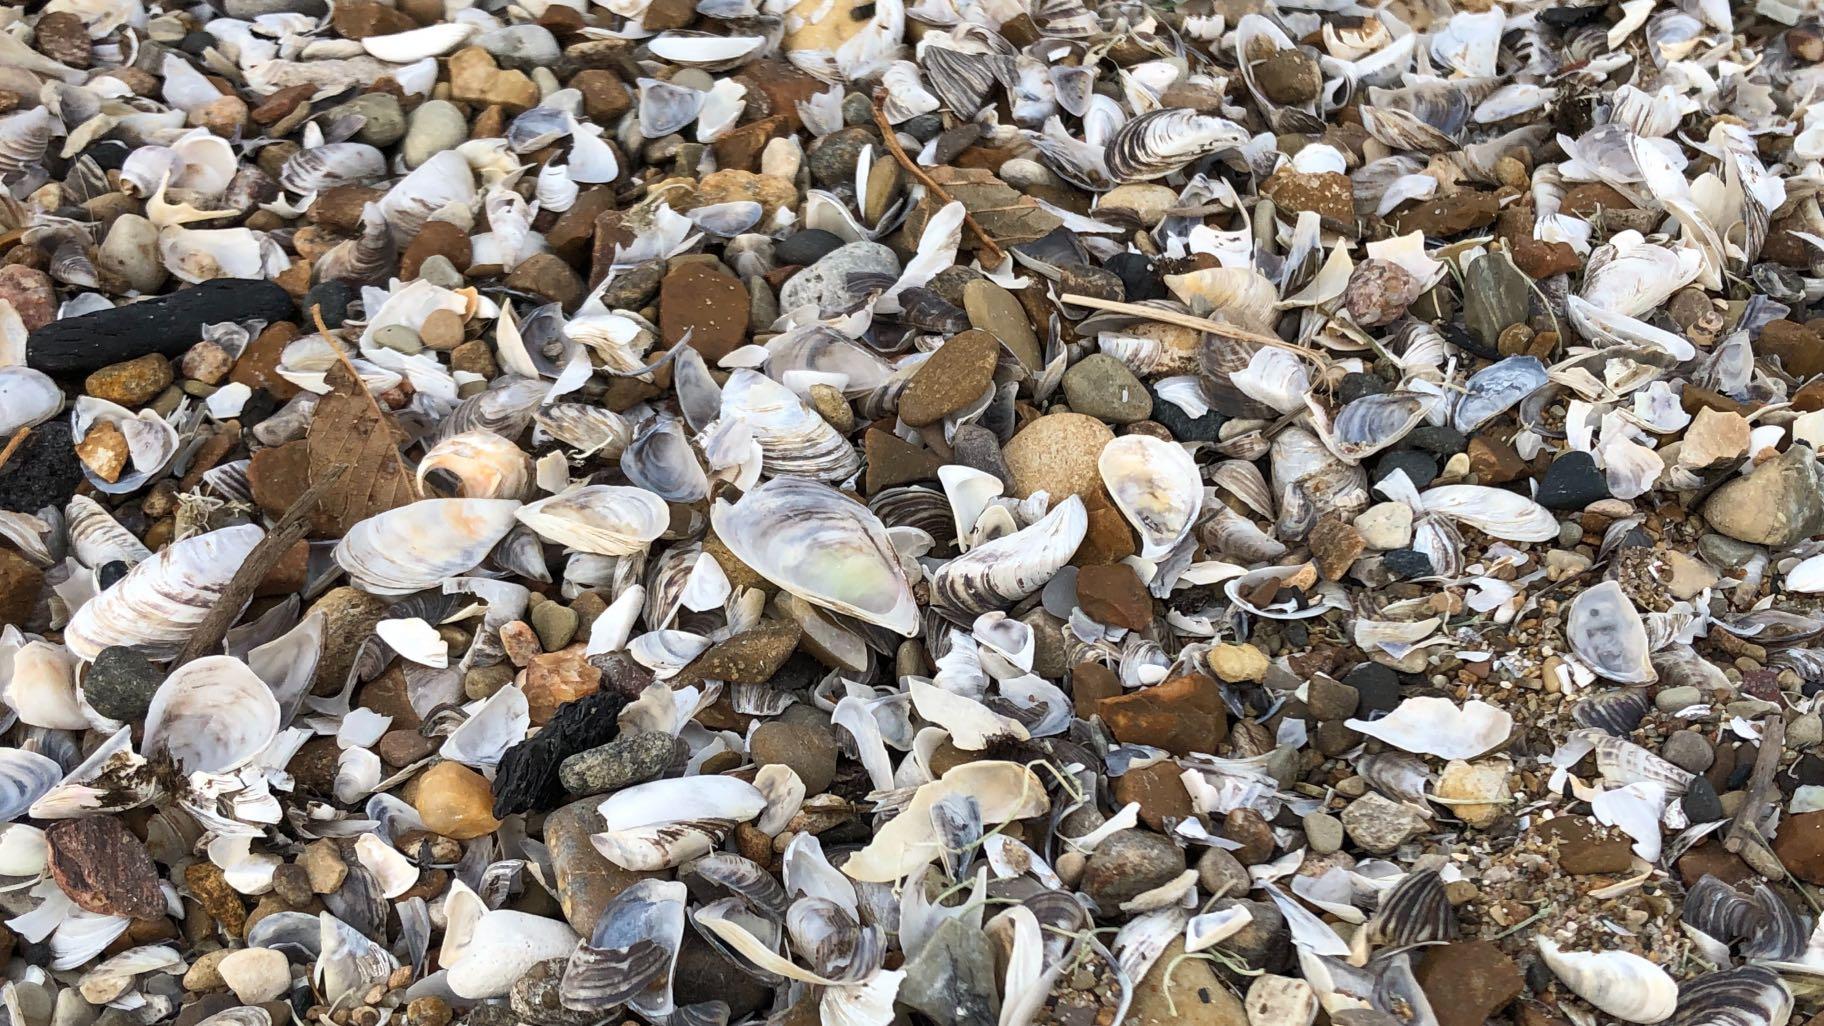 A large deposit of shells washed up on Lane Beach in Edgewater. (Patty Wetli / WTTW News)